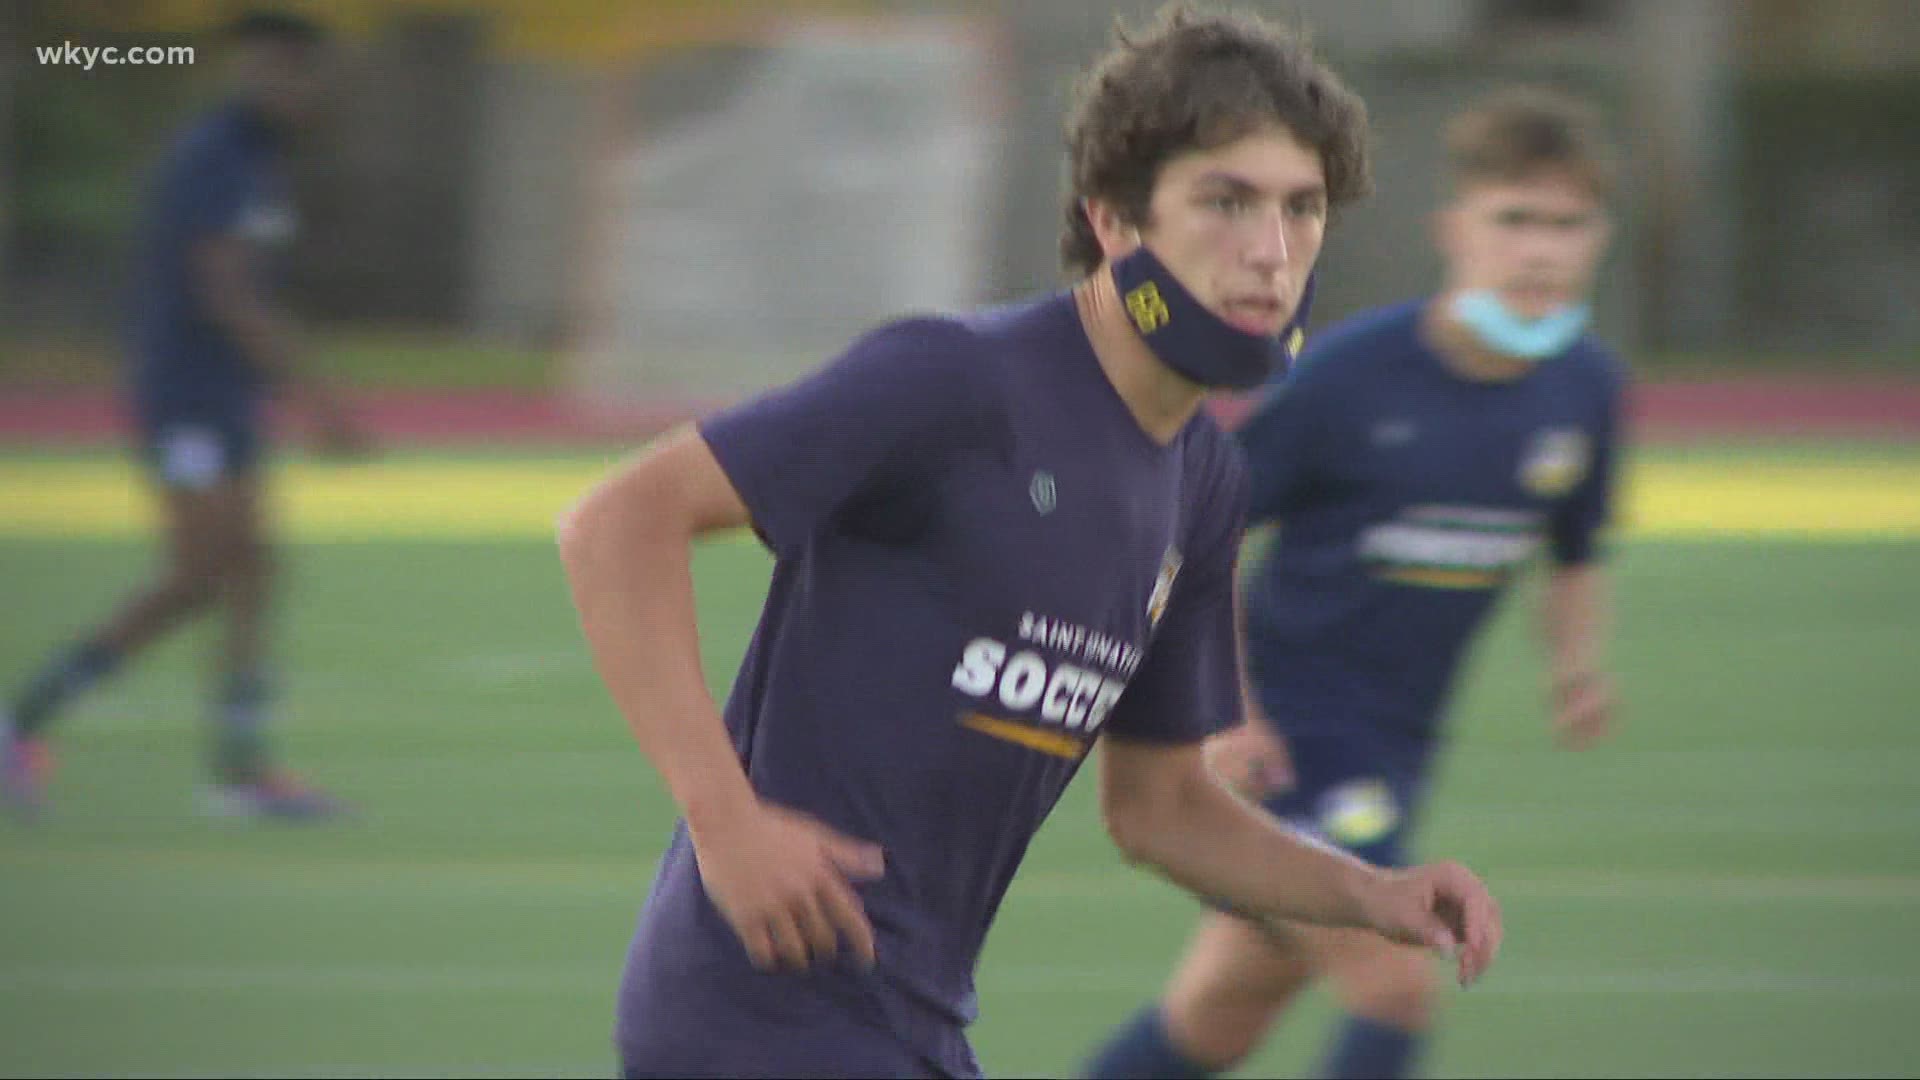 Nov. 11, 2020: The St. Ignatius High School soccer team is getting closer to winning the state championship.